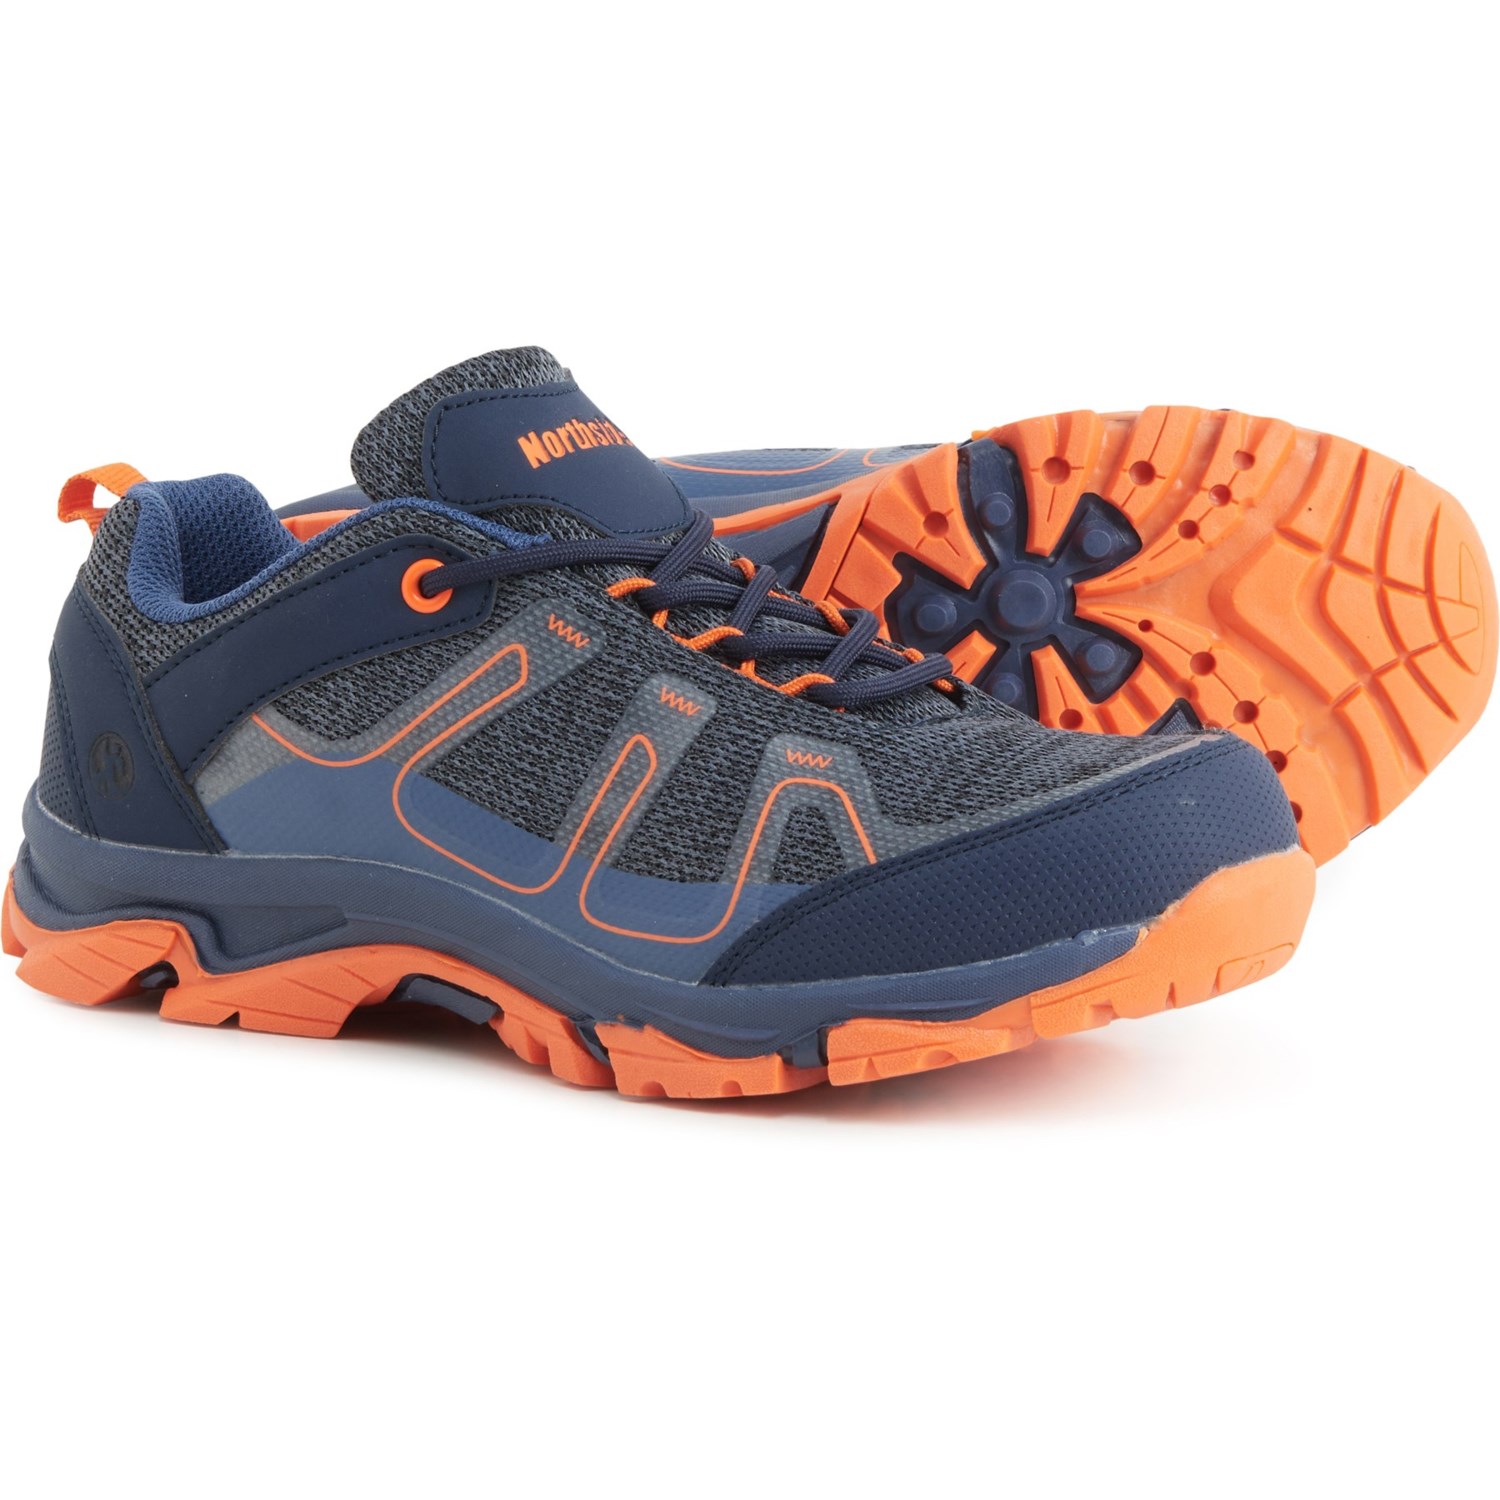 Northside Boys Gamma Hiking Shoes - Save 32%